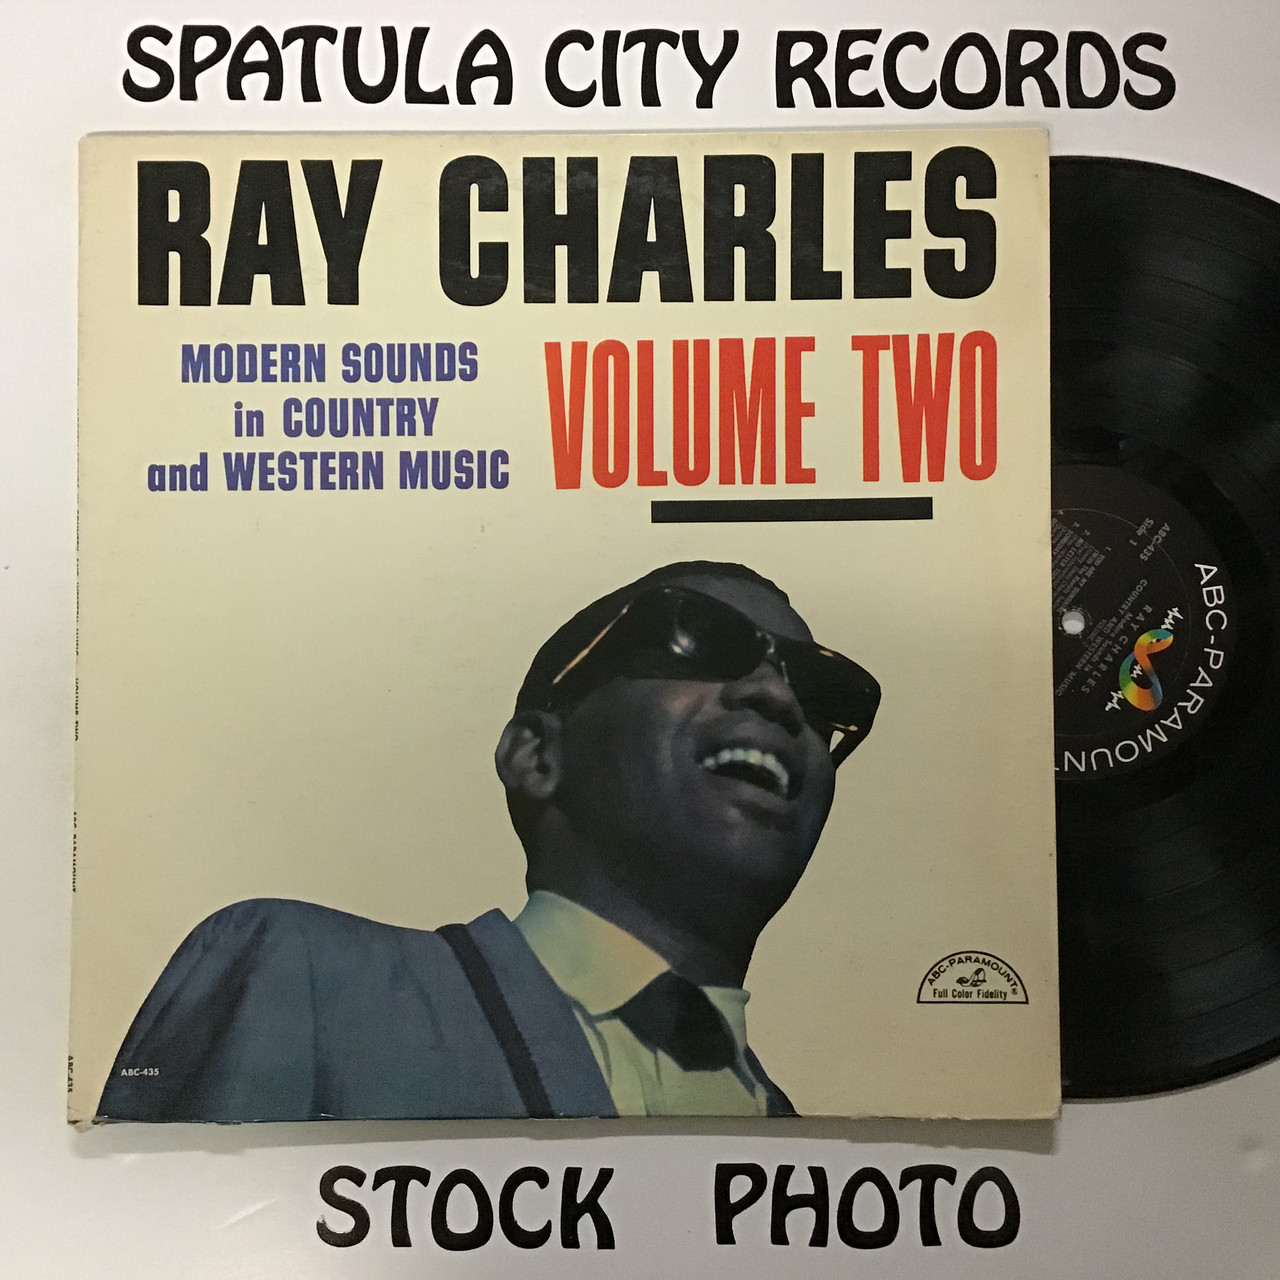 Ray Charles - Modern Sounds In Country and Western Music Volume Two - MONO - vinyl record LP